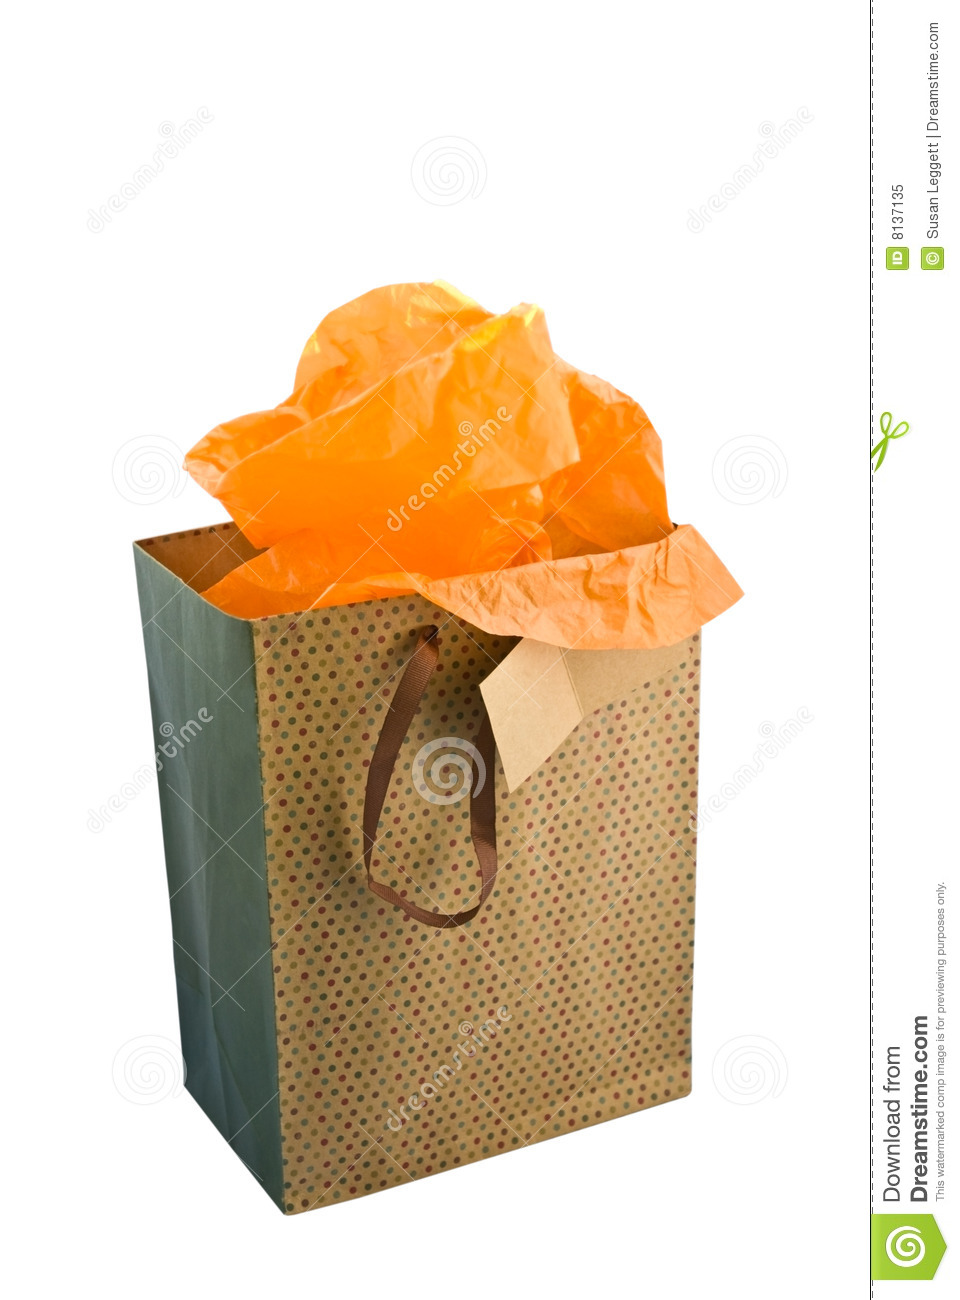 Gift Bag With Orange Paper Royalty Free Stock Photo   Image  8137135